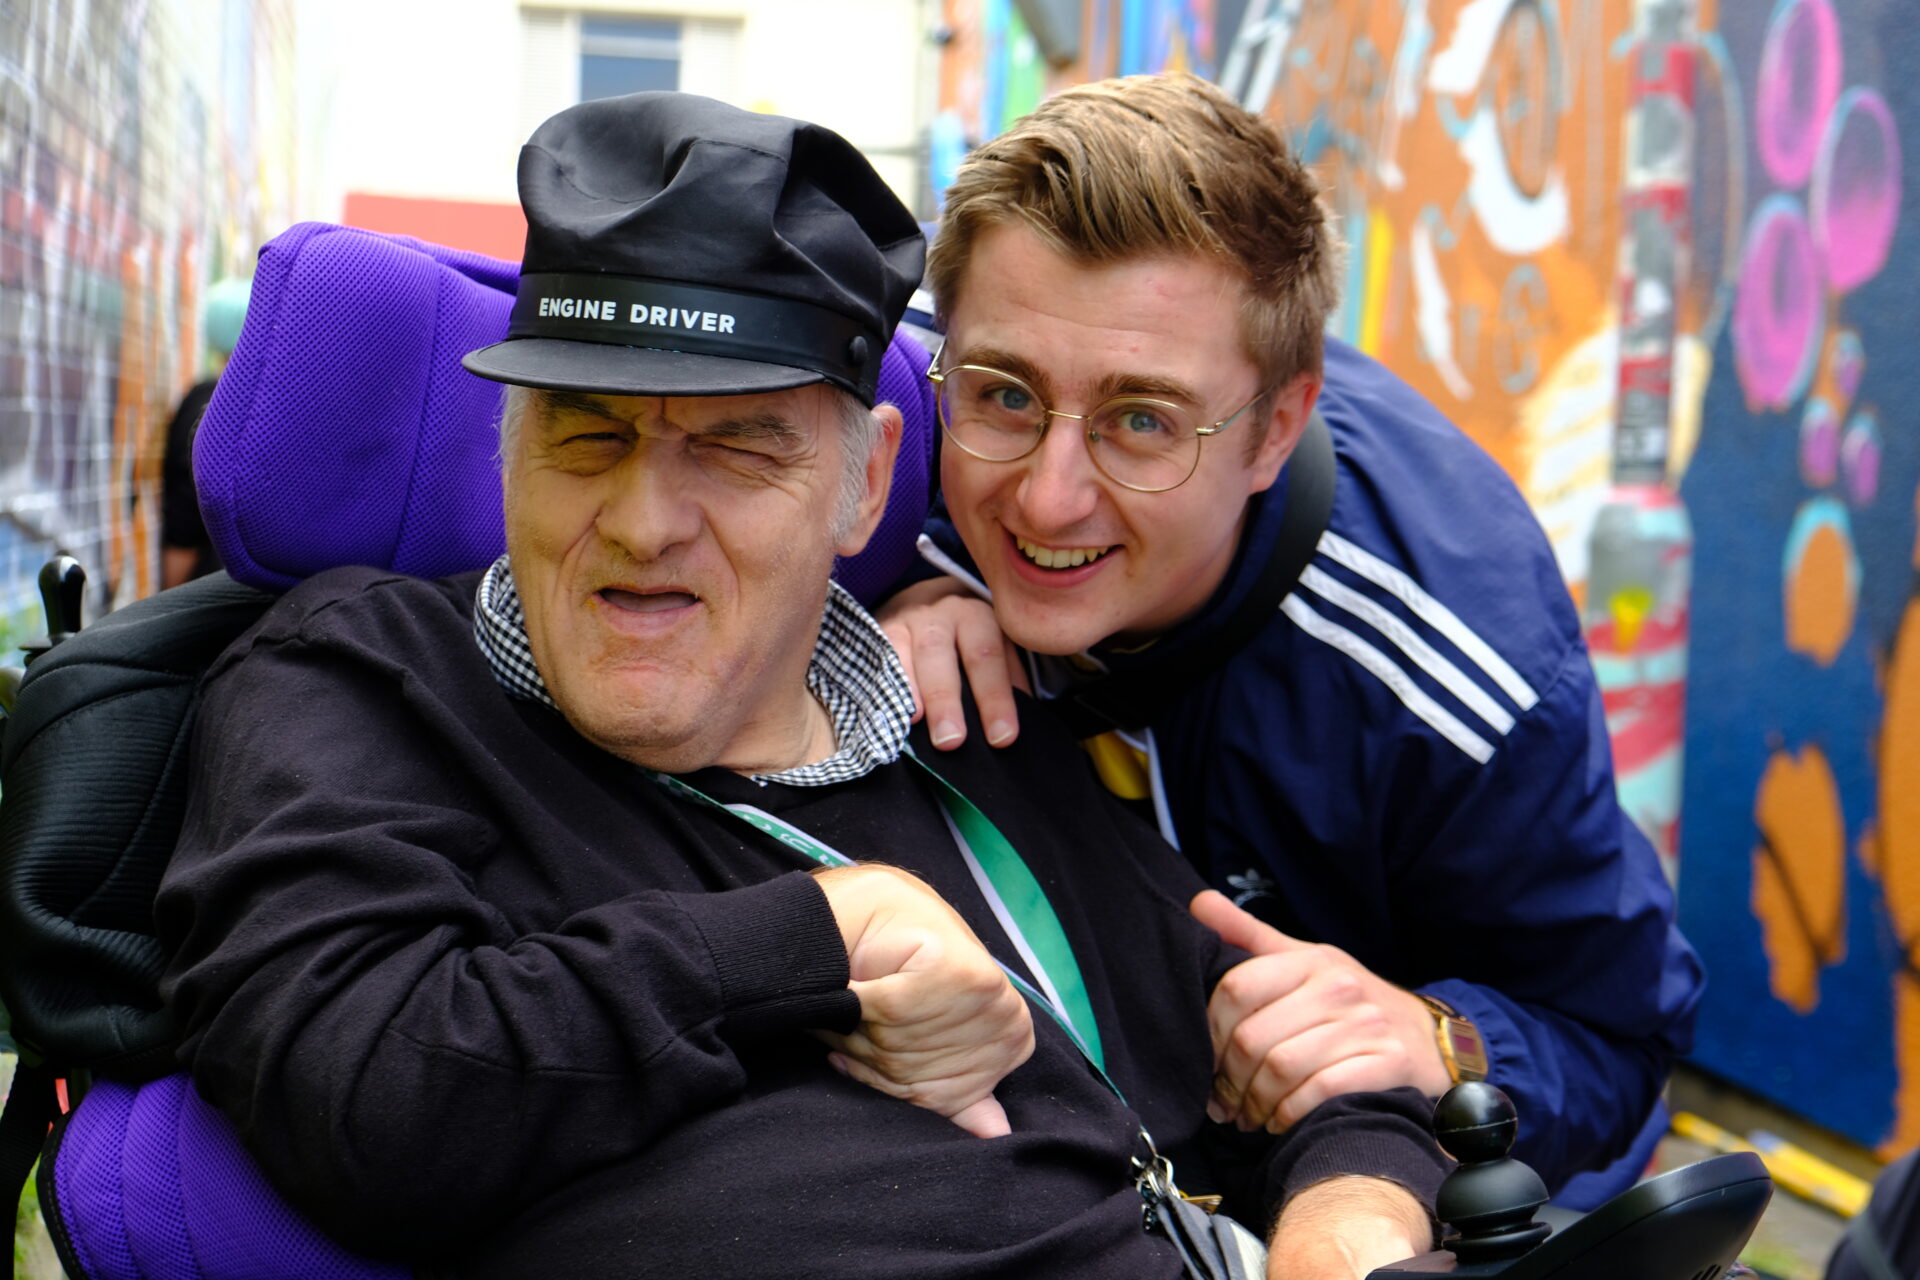 A Southdown Support Worker and a client in a wheelchair smiling. They are in an alleyway with vibrant graffiti on the walls behind them. 